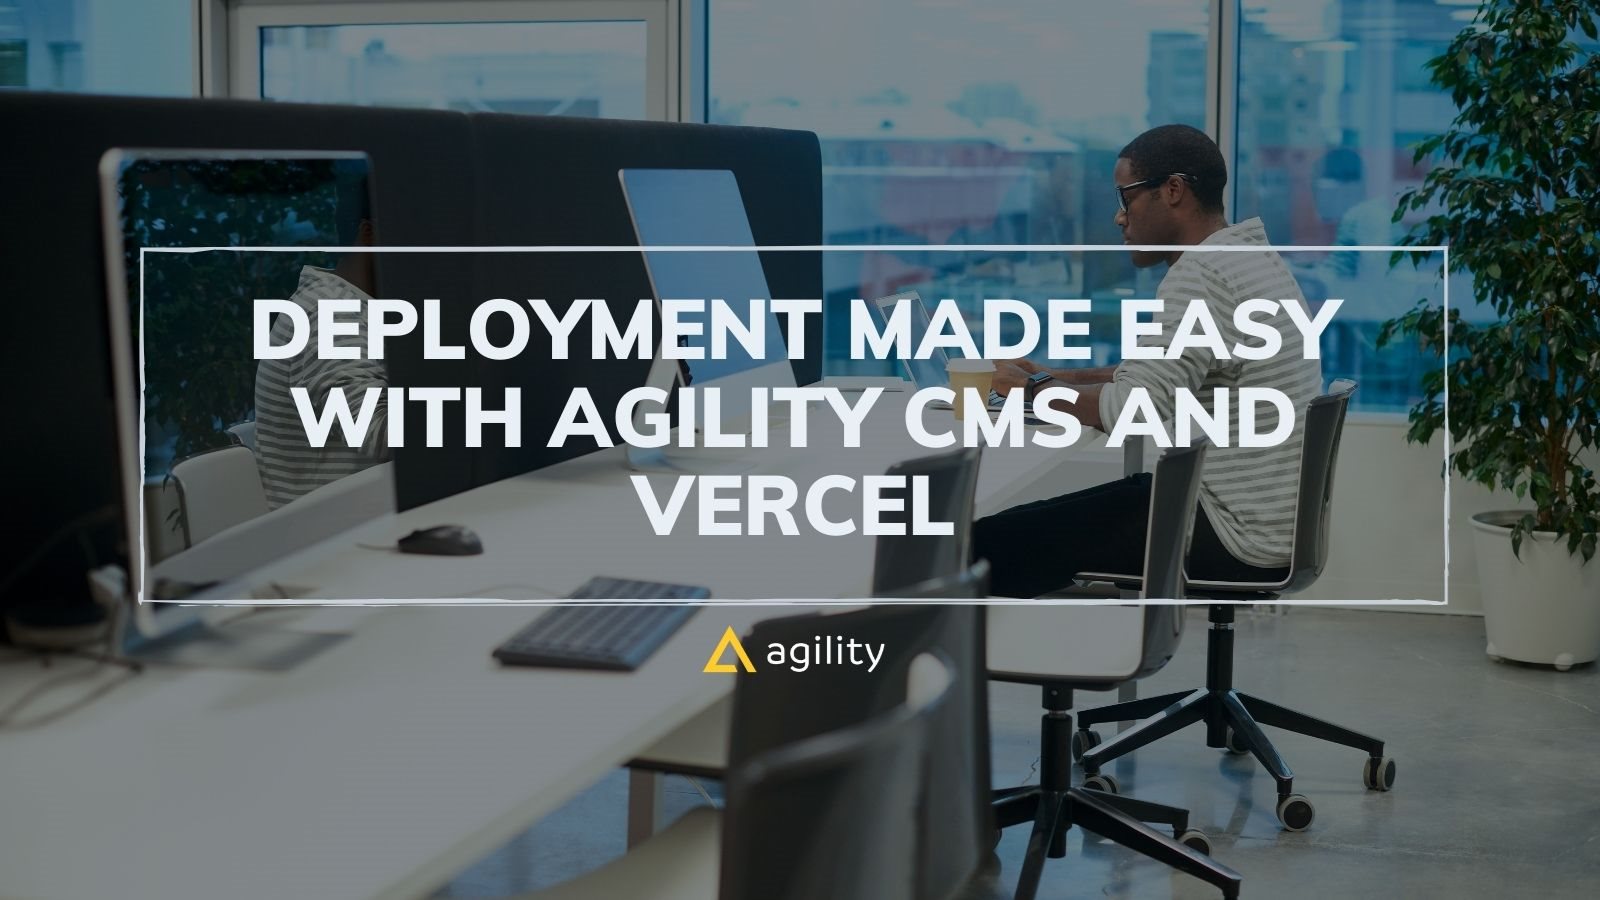 Deployment made easy with Agility CMS and Vercel